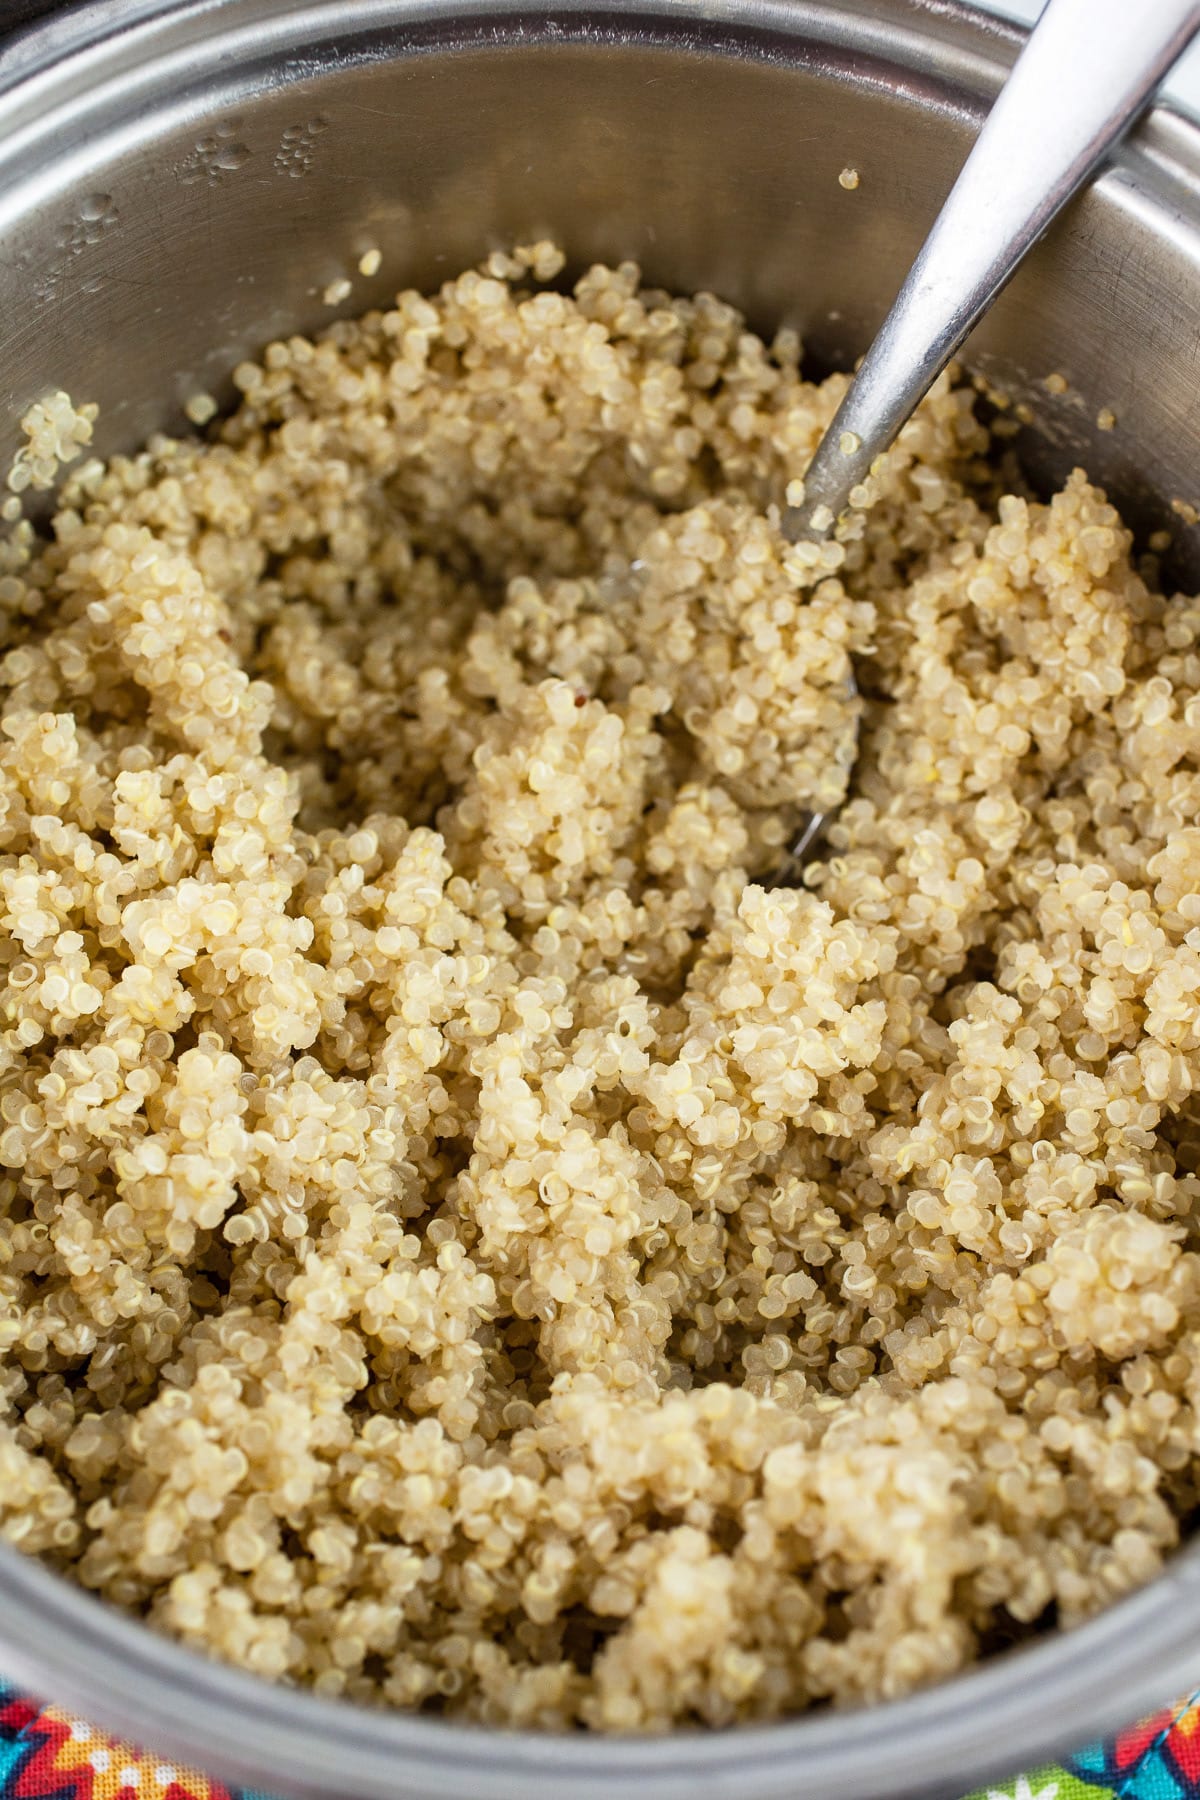 Cooked quinoa in small pan with spoon.